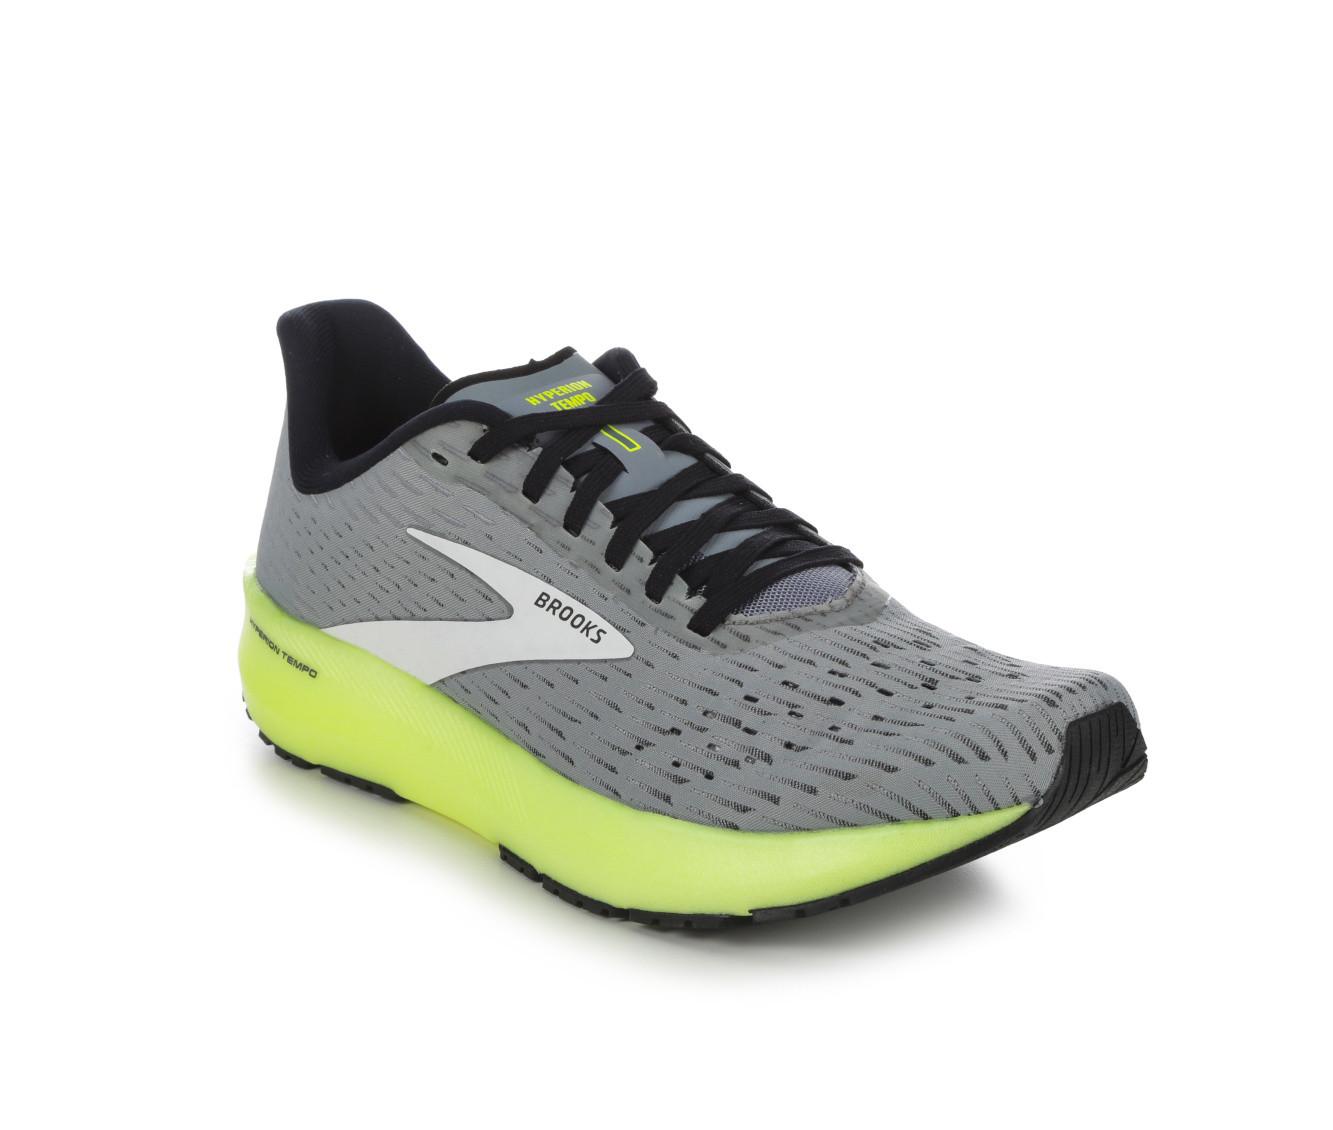 Men's Brooks Hyperion Tempo-MA Running Shoes